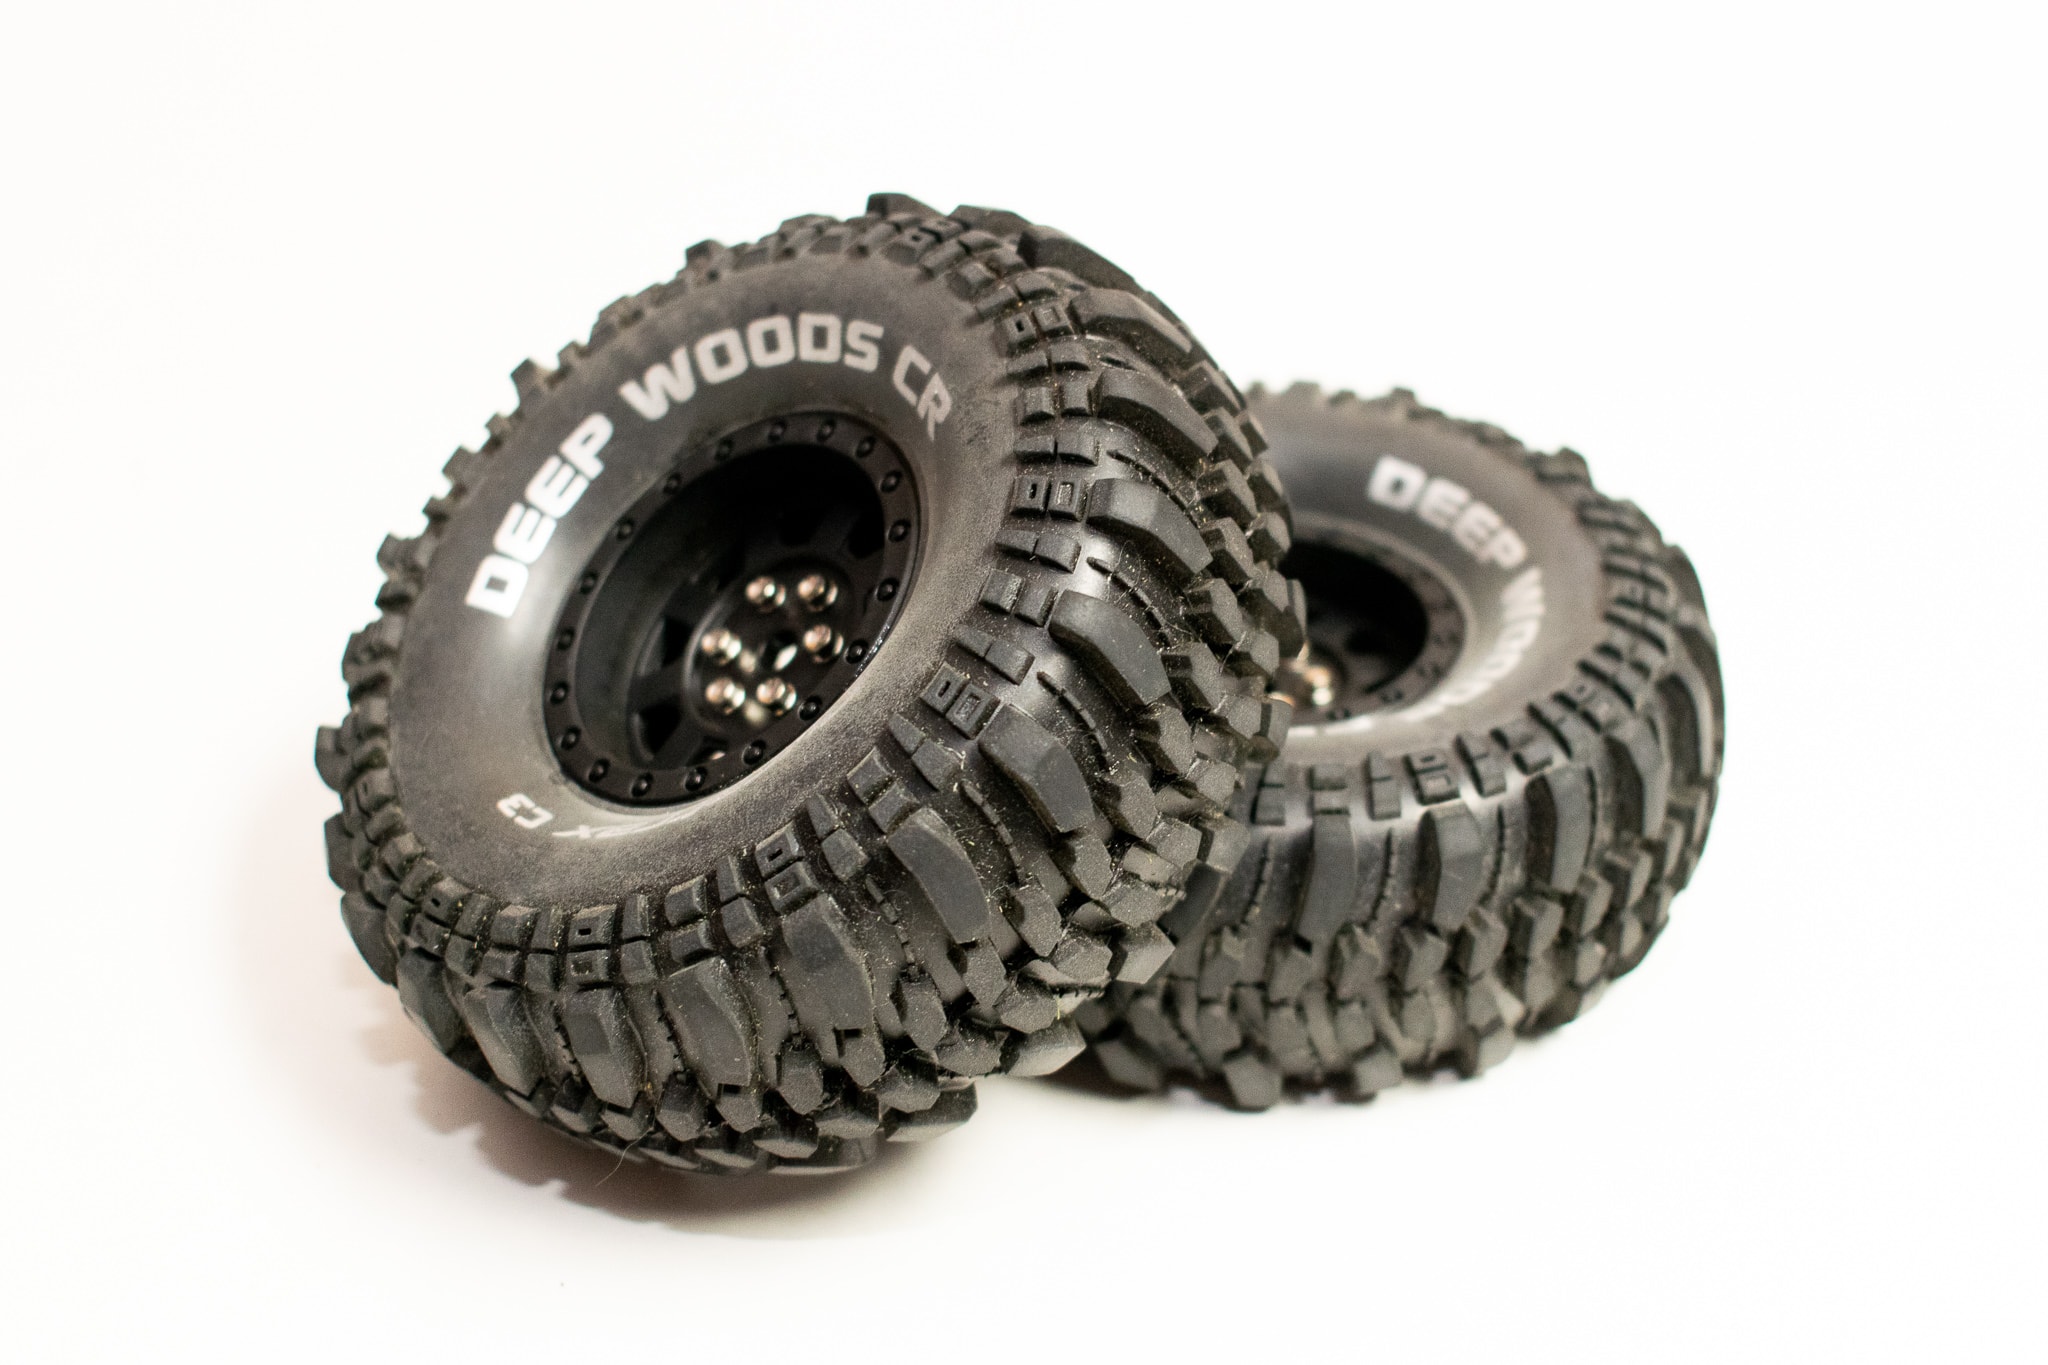 Unmounted, Set of 2 High Traction Duratrax Deep Woods 1.9 Inch RC Rock Crawler Tires with Foam Inserts C3 Super Soft Compound 